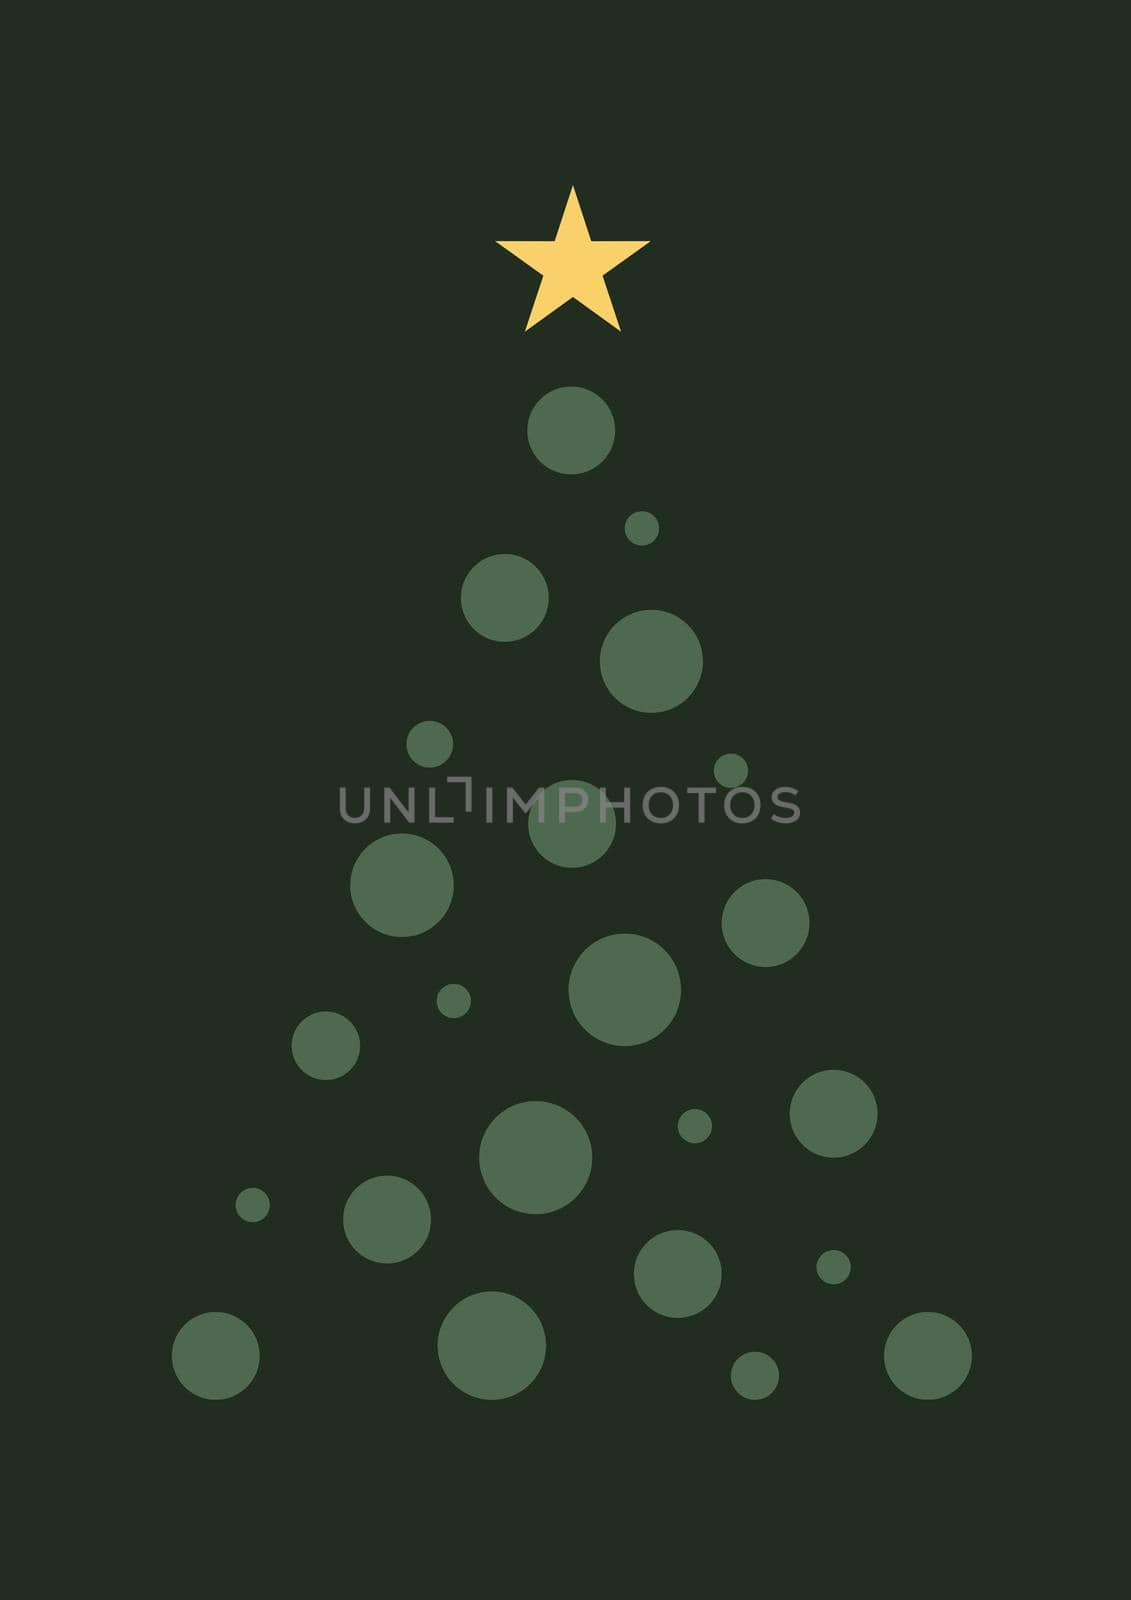 Vertical vector simple Christmas tree with dark green card background by cougarsan